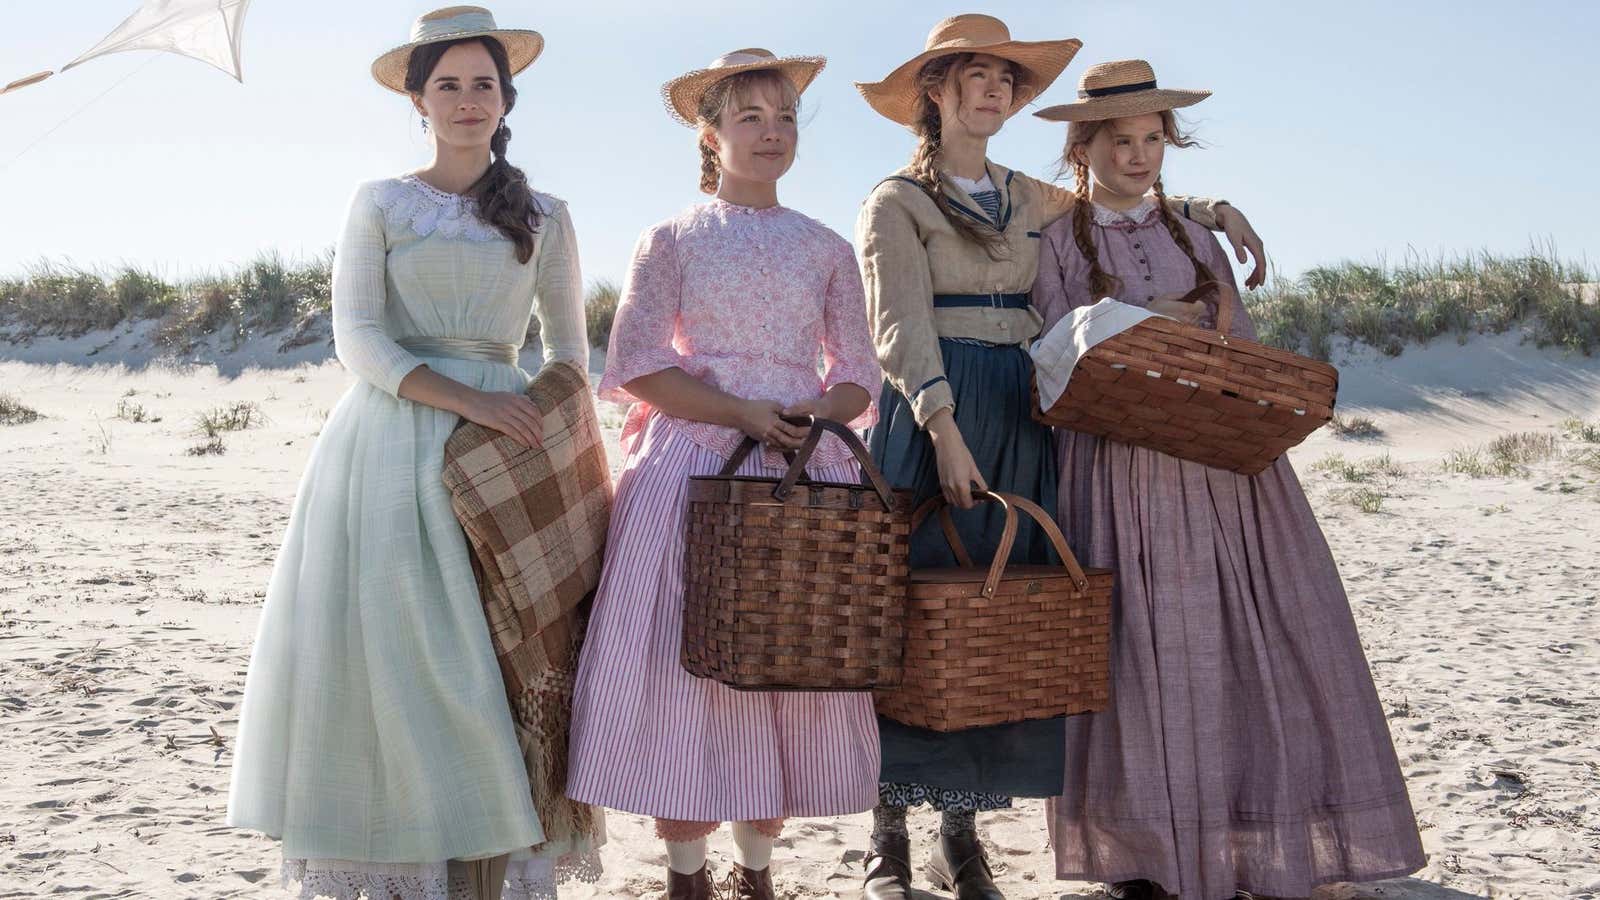 These little women might be very big Oscar contenders.